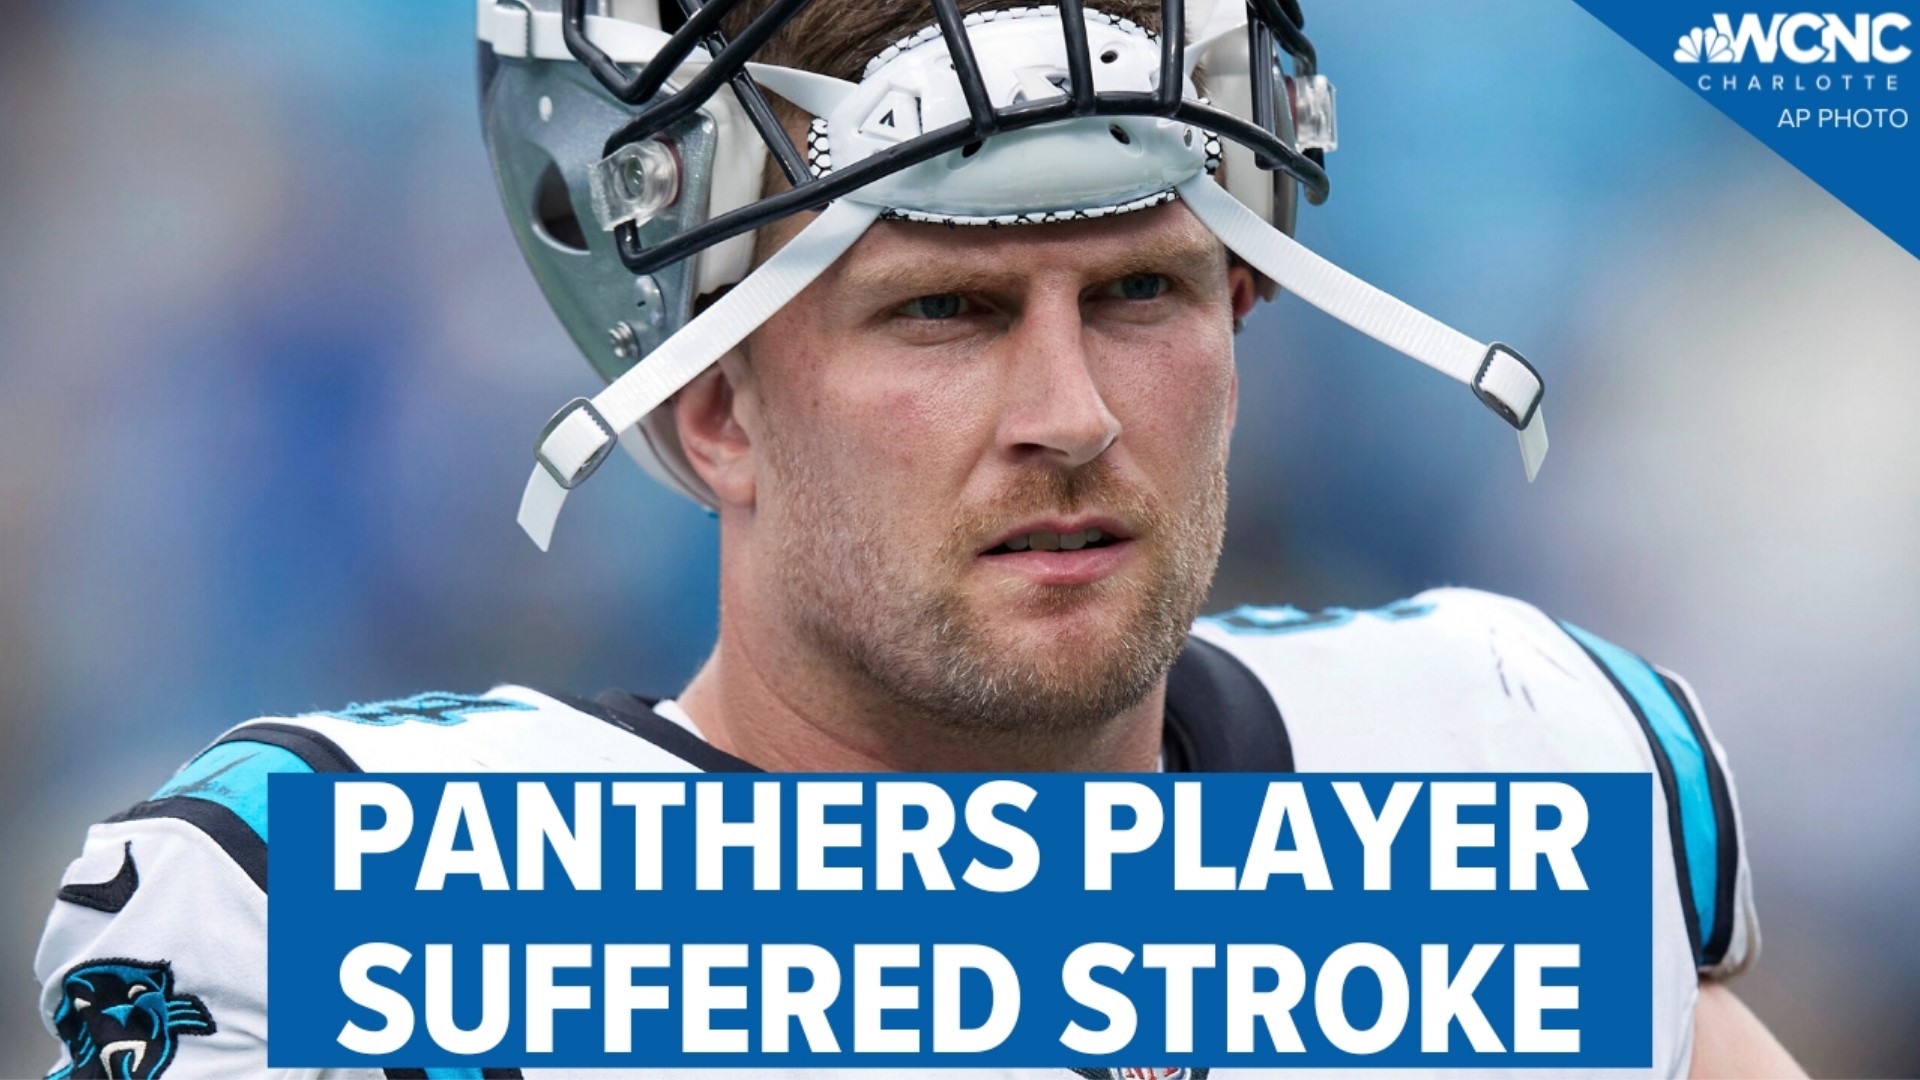 Carolina Panthers defensive end Henry Anderson said he's hopeful he can return to action against the Seattle Seahawks after suffering what he called “a minor stroke”